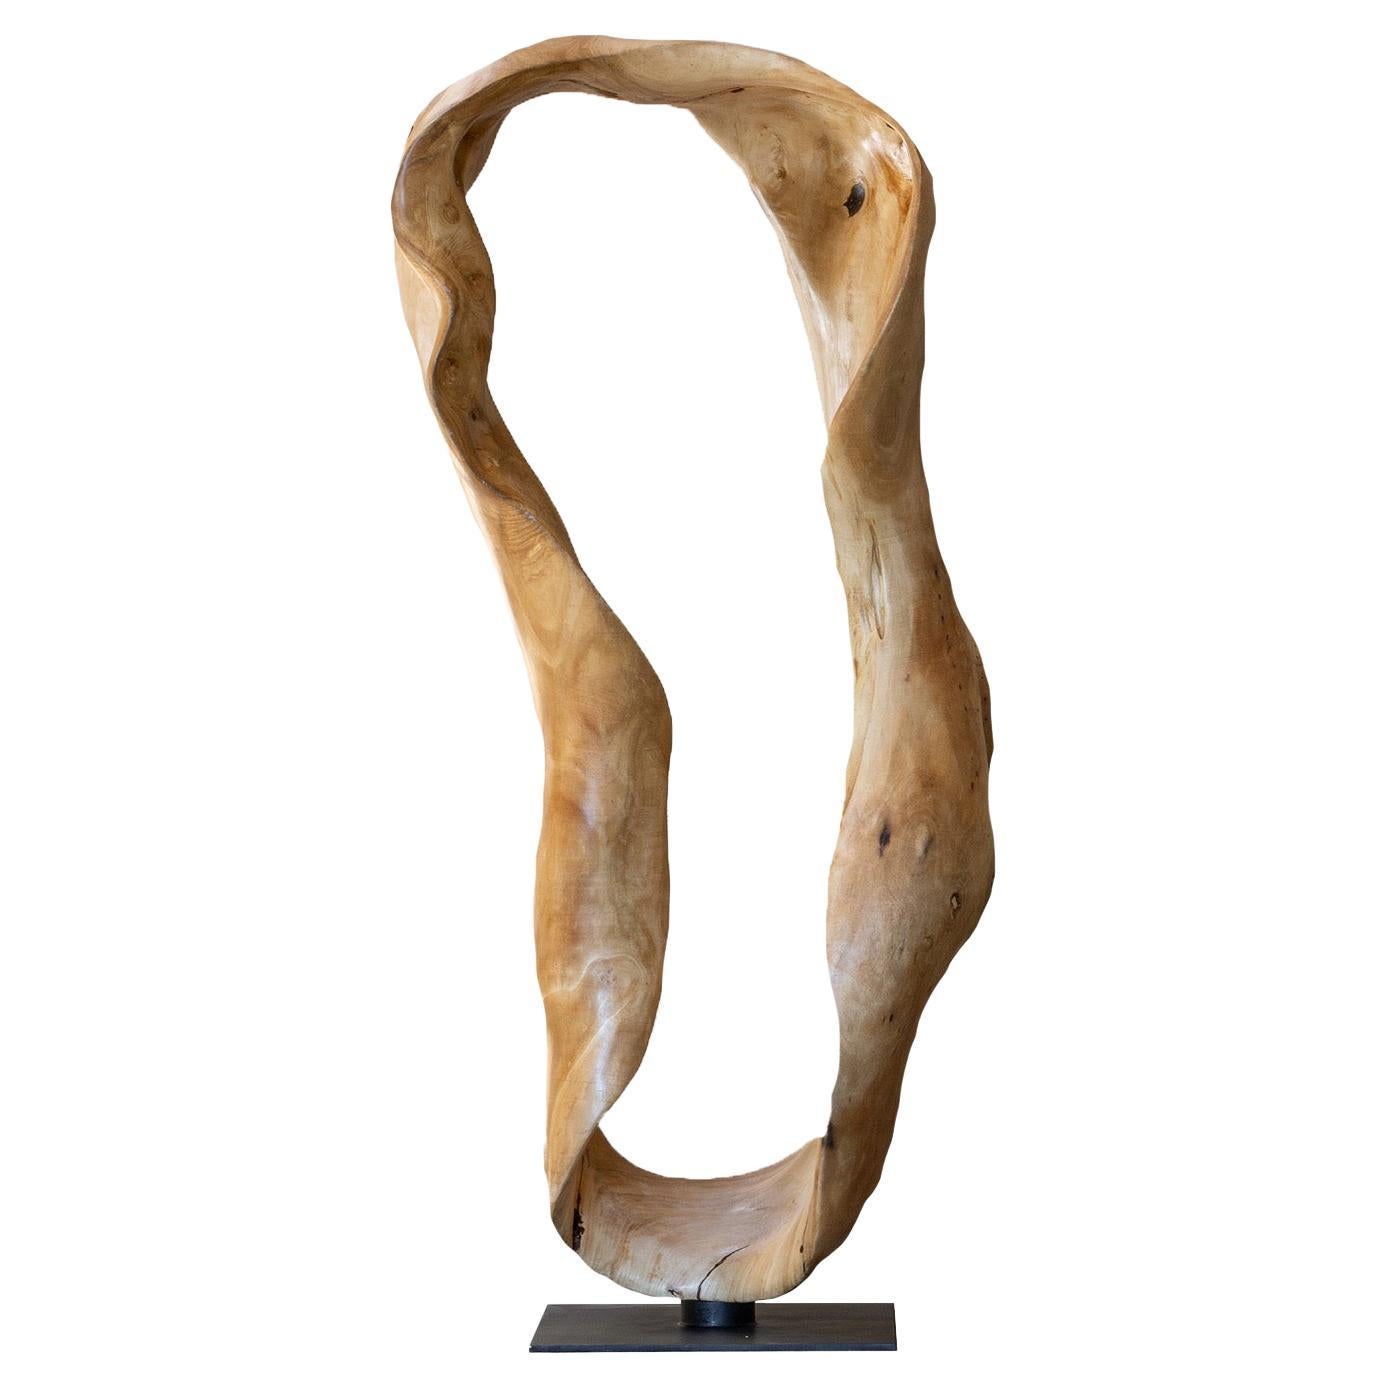 Vida Aged Wood Sculpture by CEU Studio, Represented by Tuleste Factory For Sale